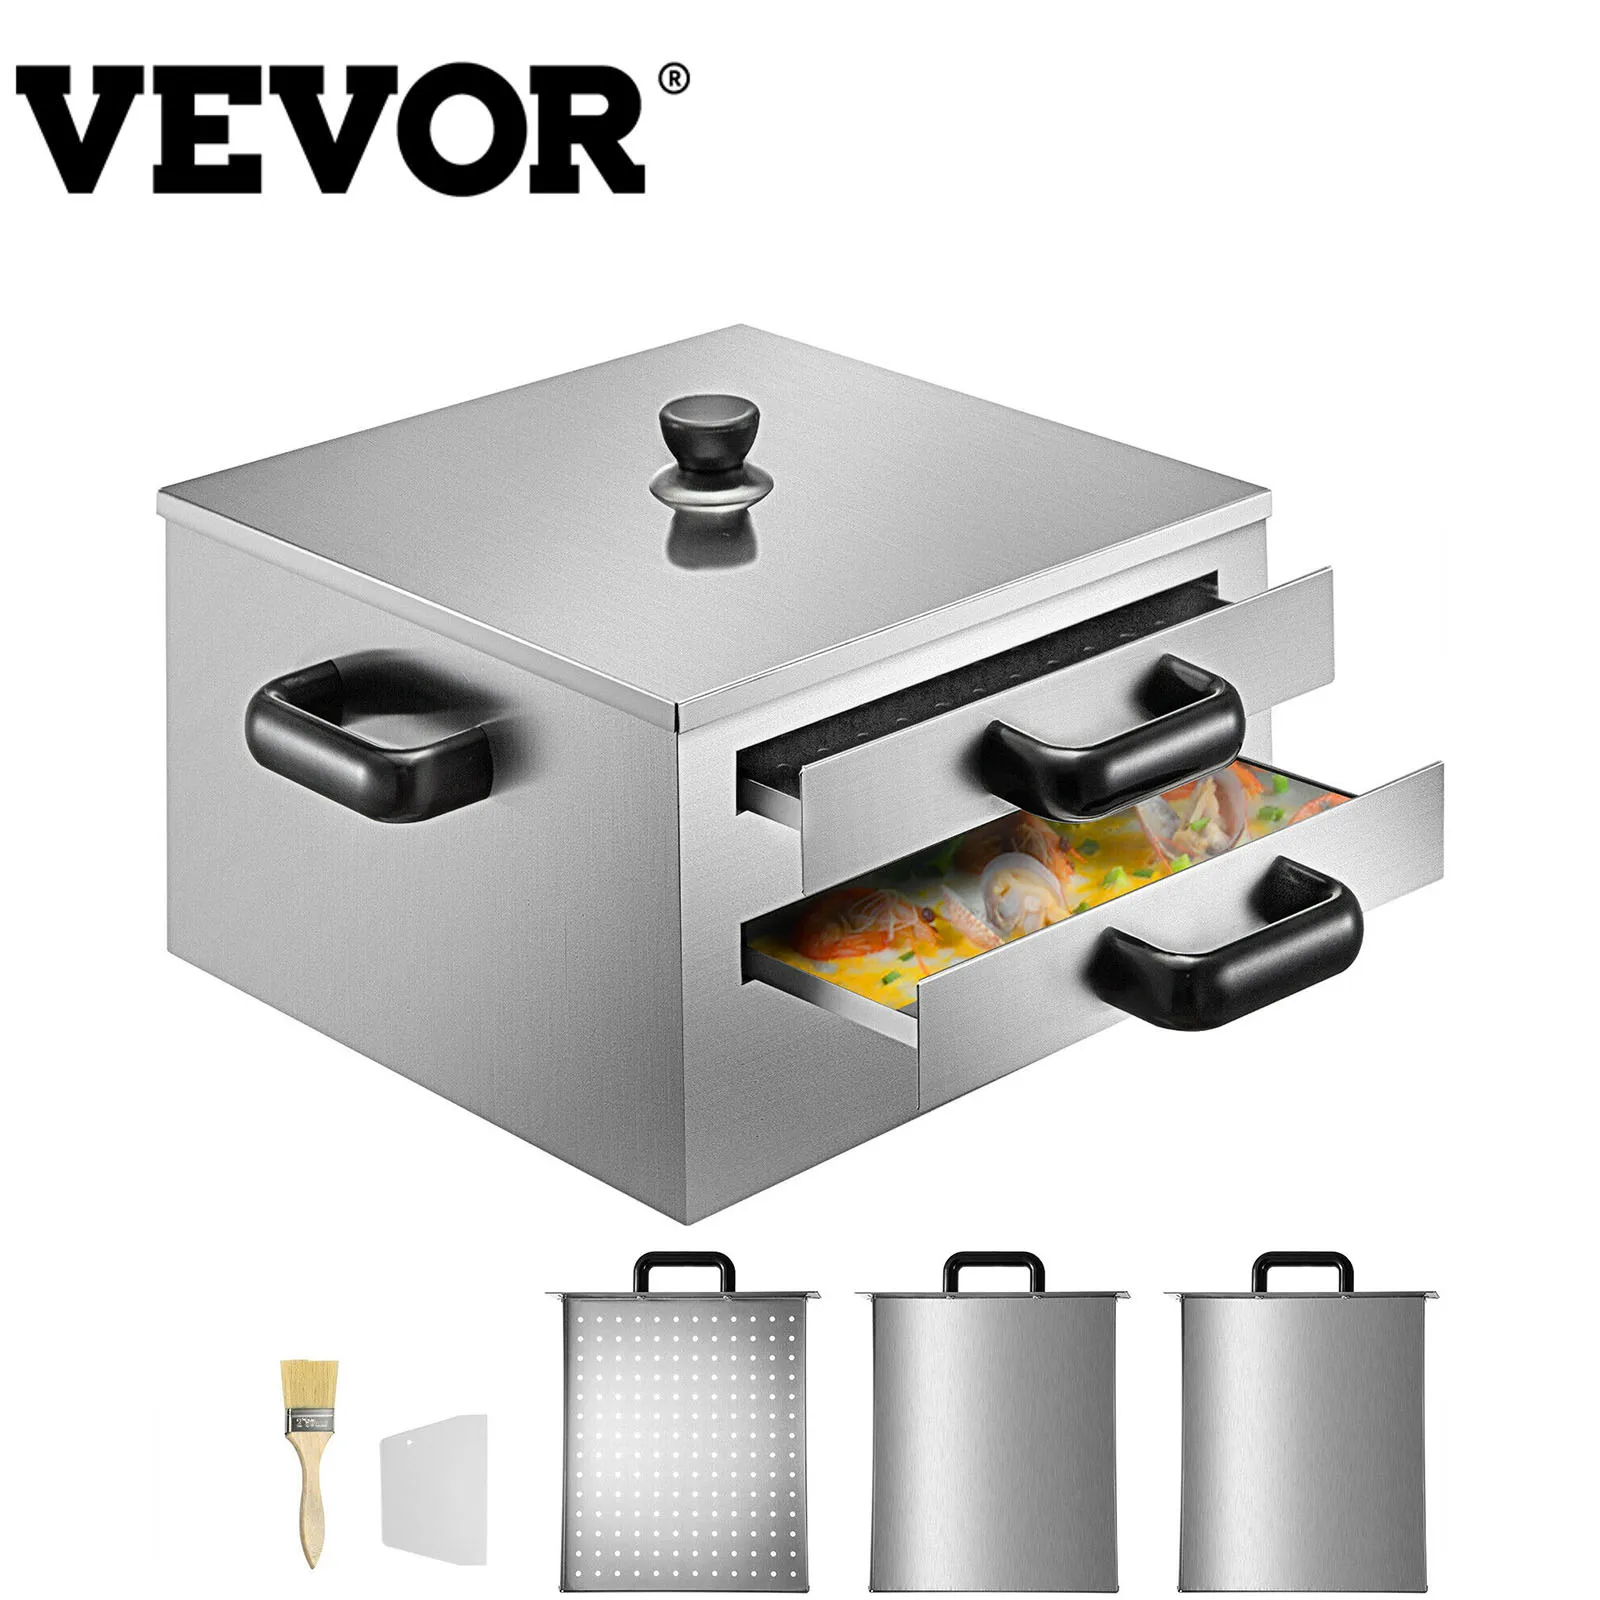 VEVOR 2-Layer Rice Roll Machine with Food-Grade Stainless Steel Easy to Clean Kitchen Appliances for Steaming Dumpling Fish Home